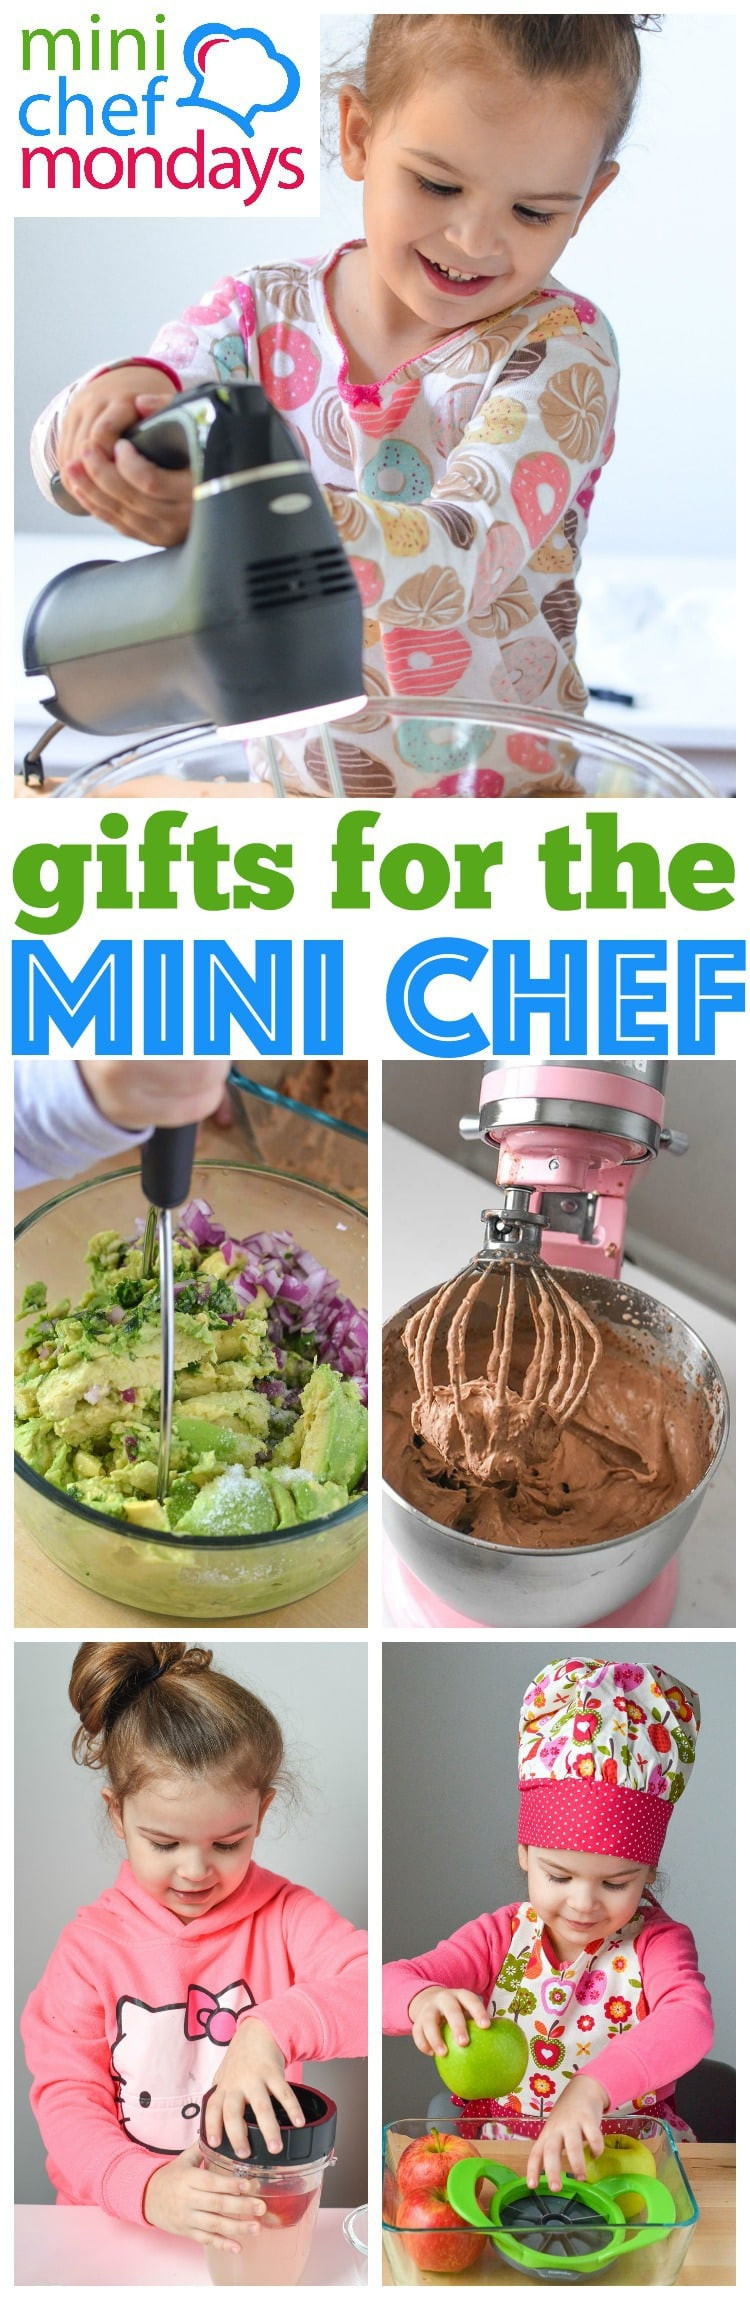 Kids Chef Gifts
 Mini Chef Gifts for Kitchen Courtney s Sweets